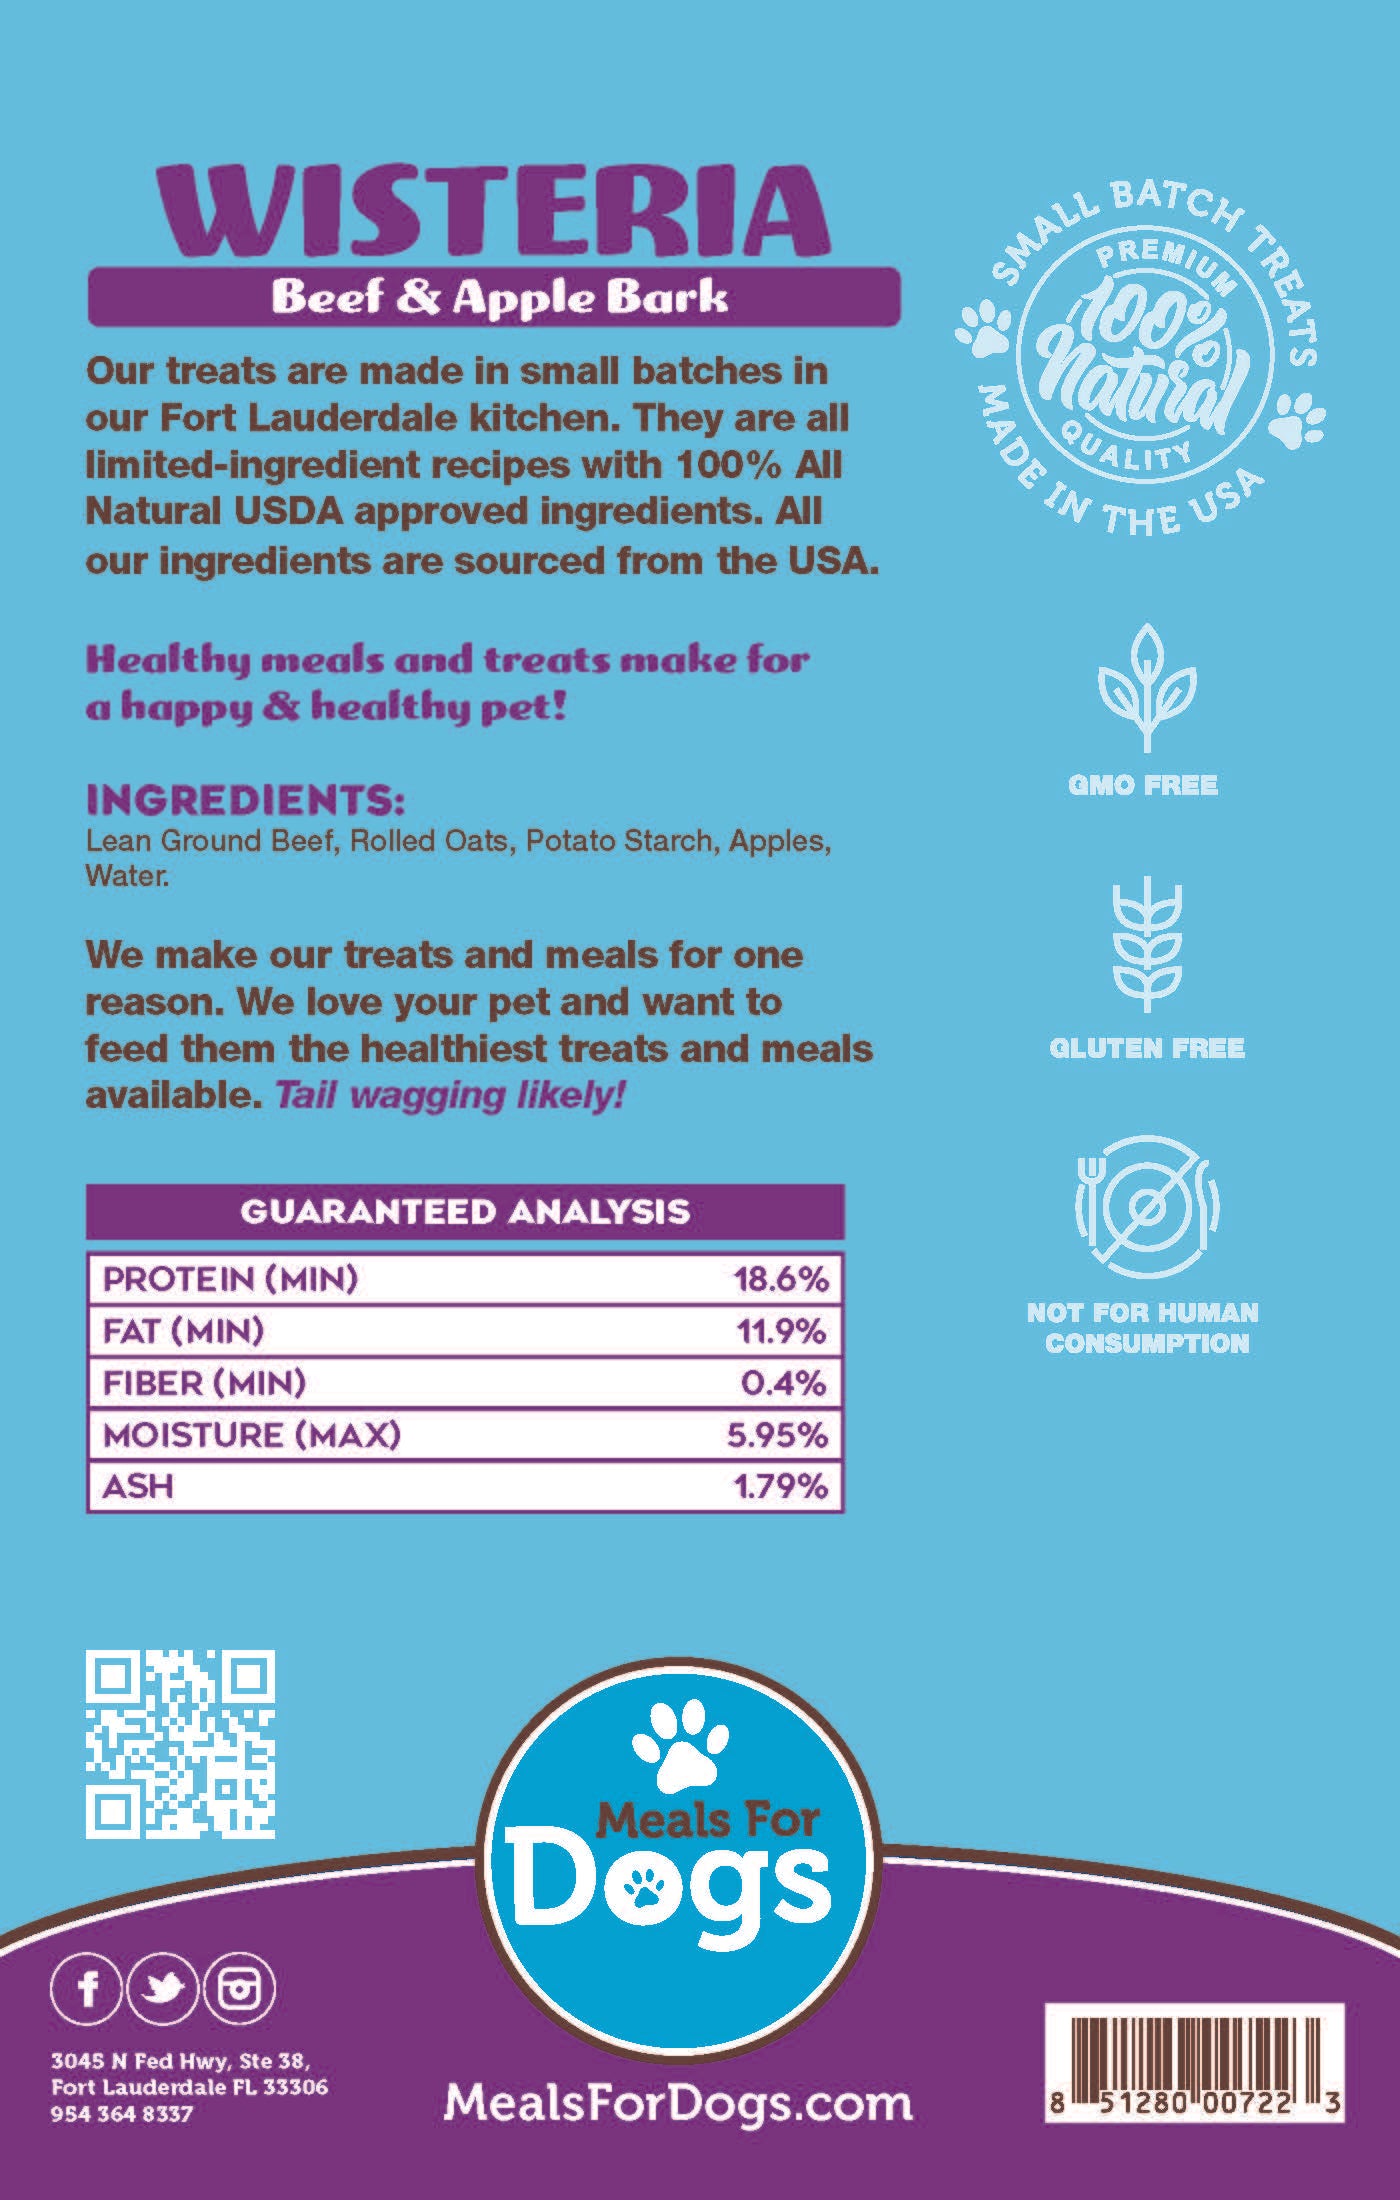 Wisteria Beef & Apple Treats | Meals for Dogs